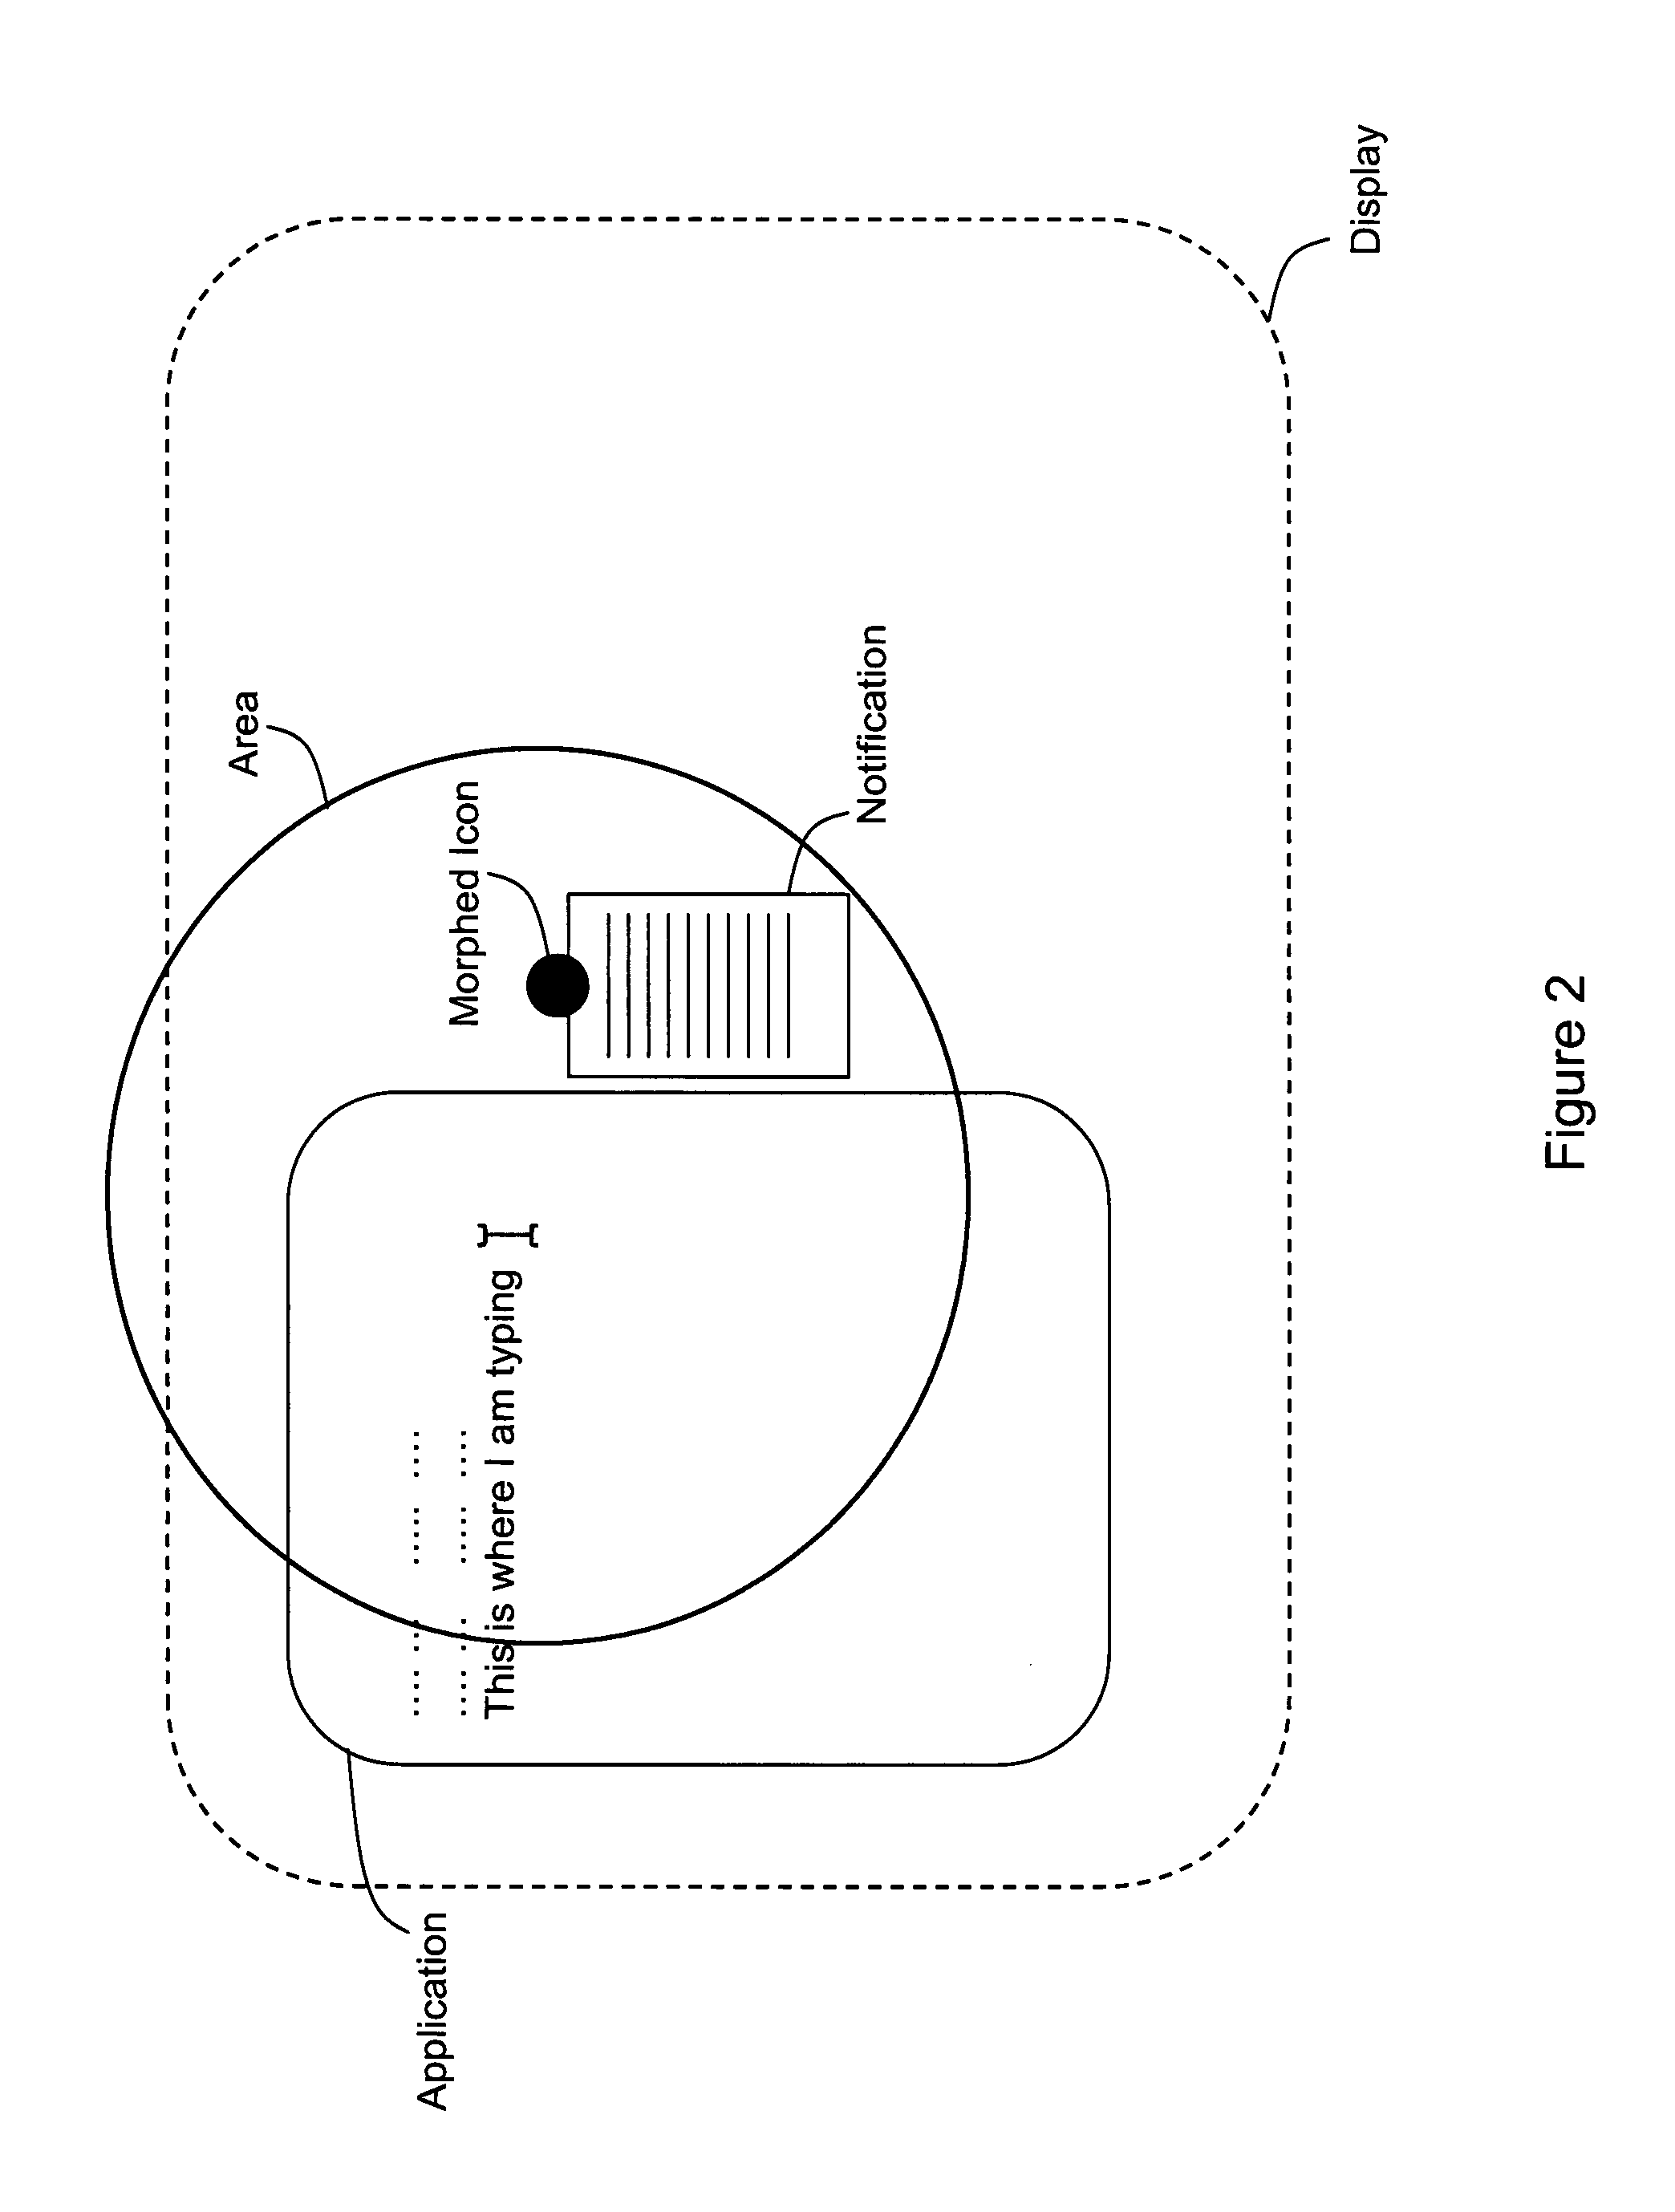 Automatic communication notification and answering method in communication correspondance